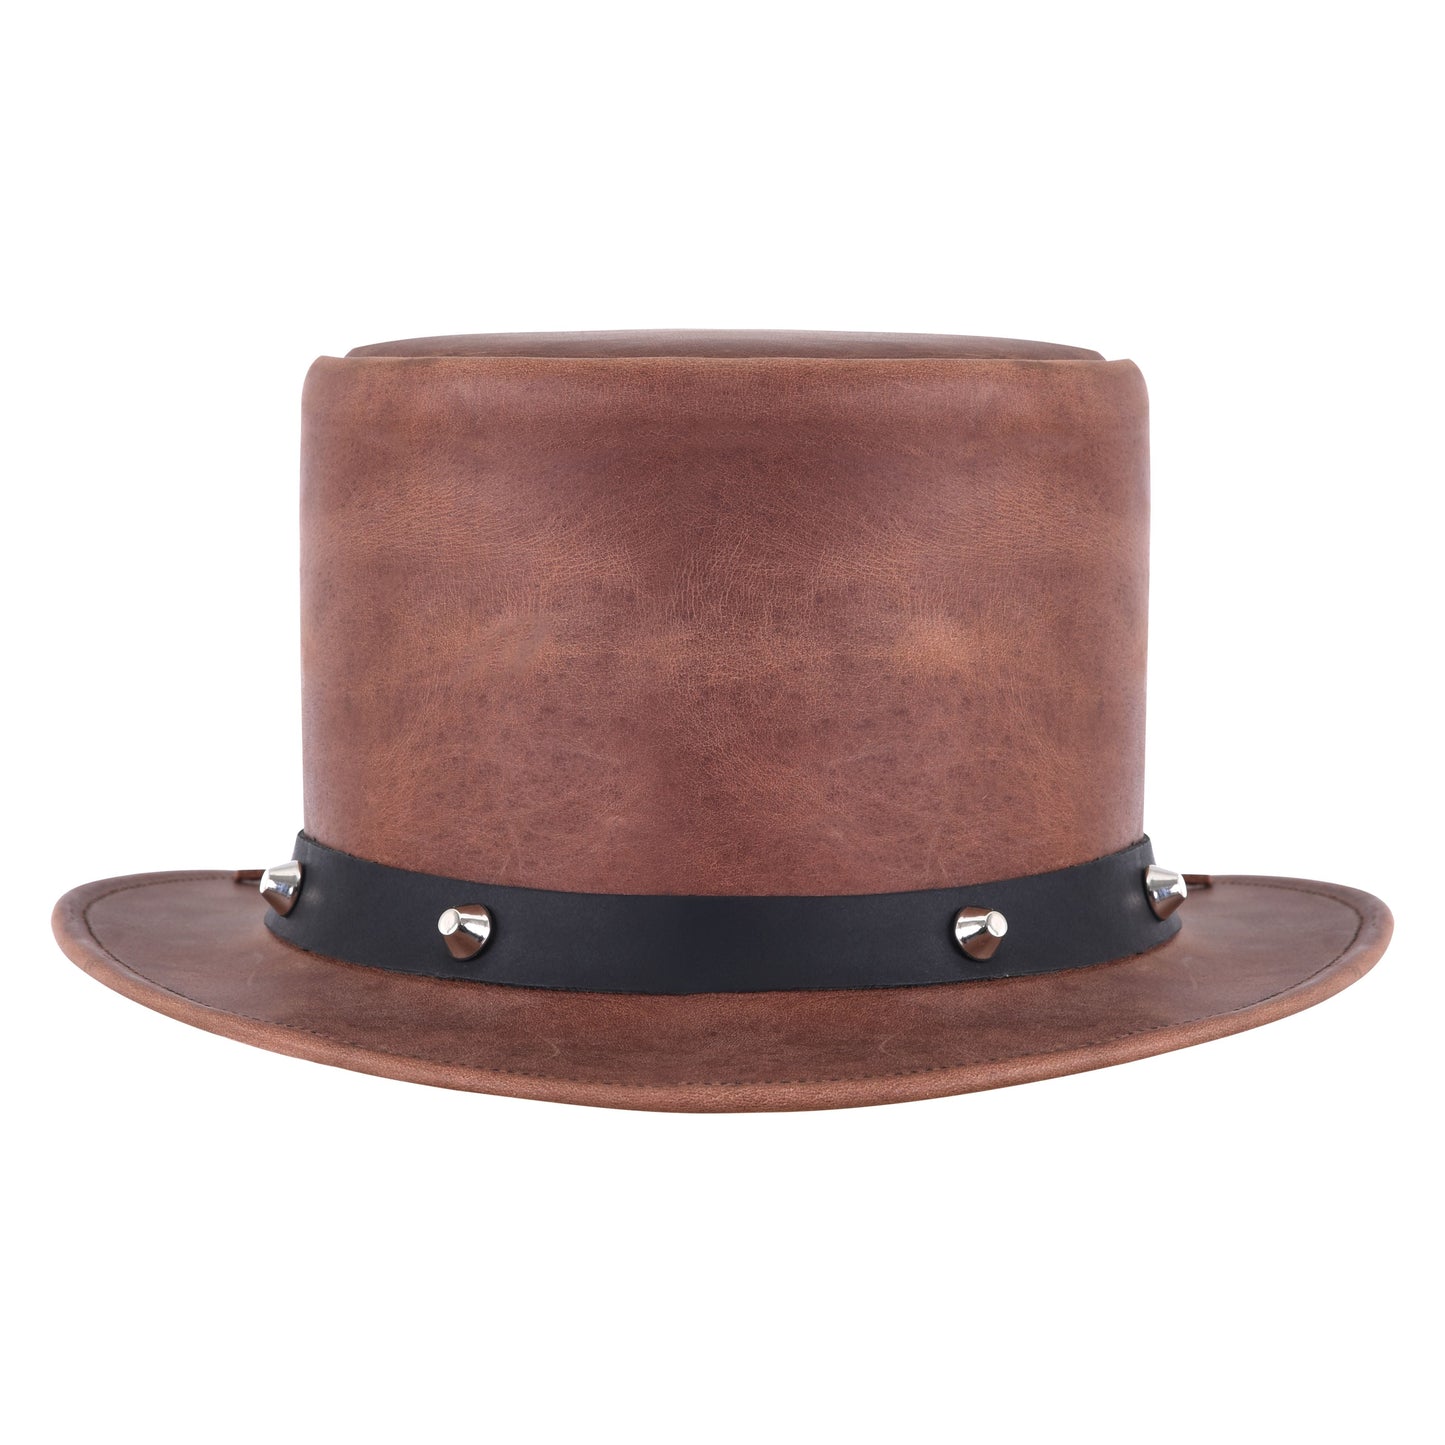 Distressed Style Classic Genuine Brown Leather Top Hat